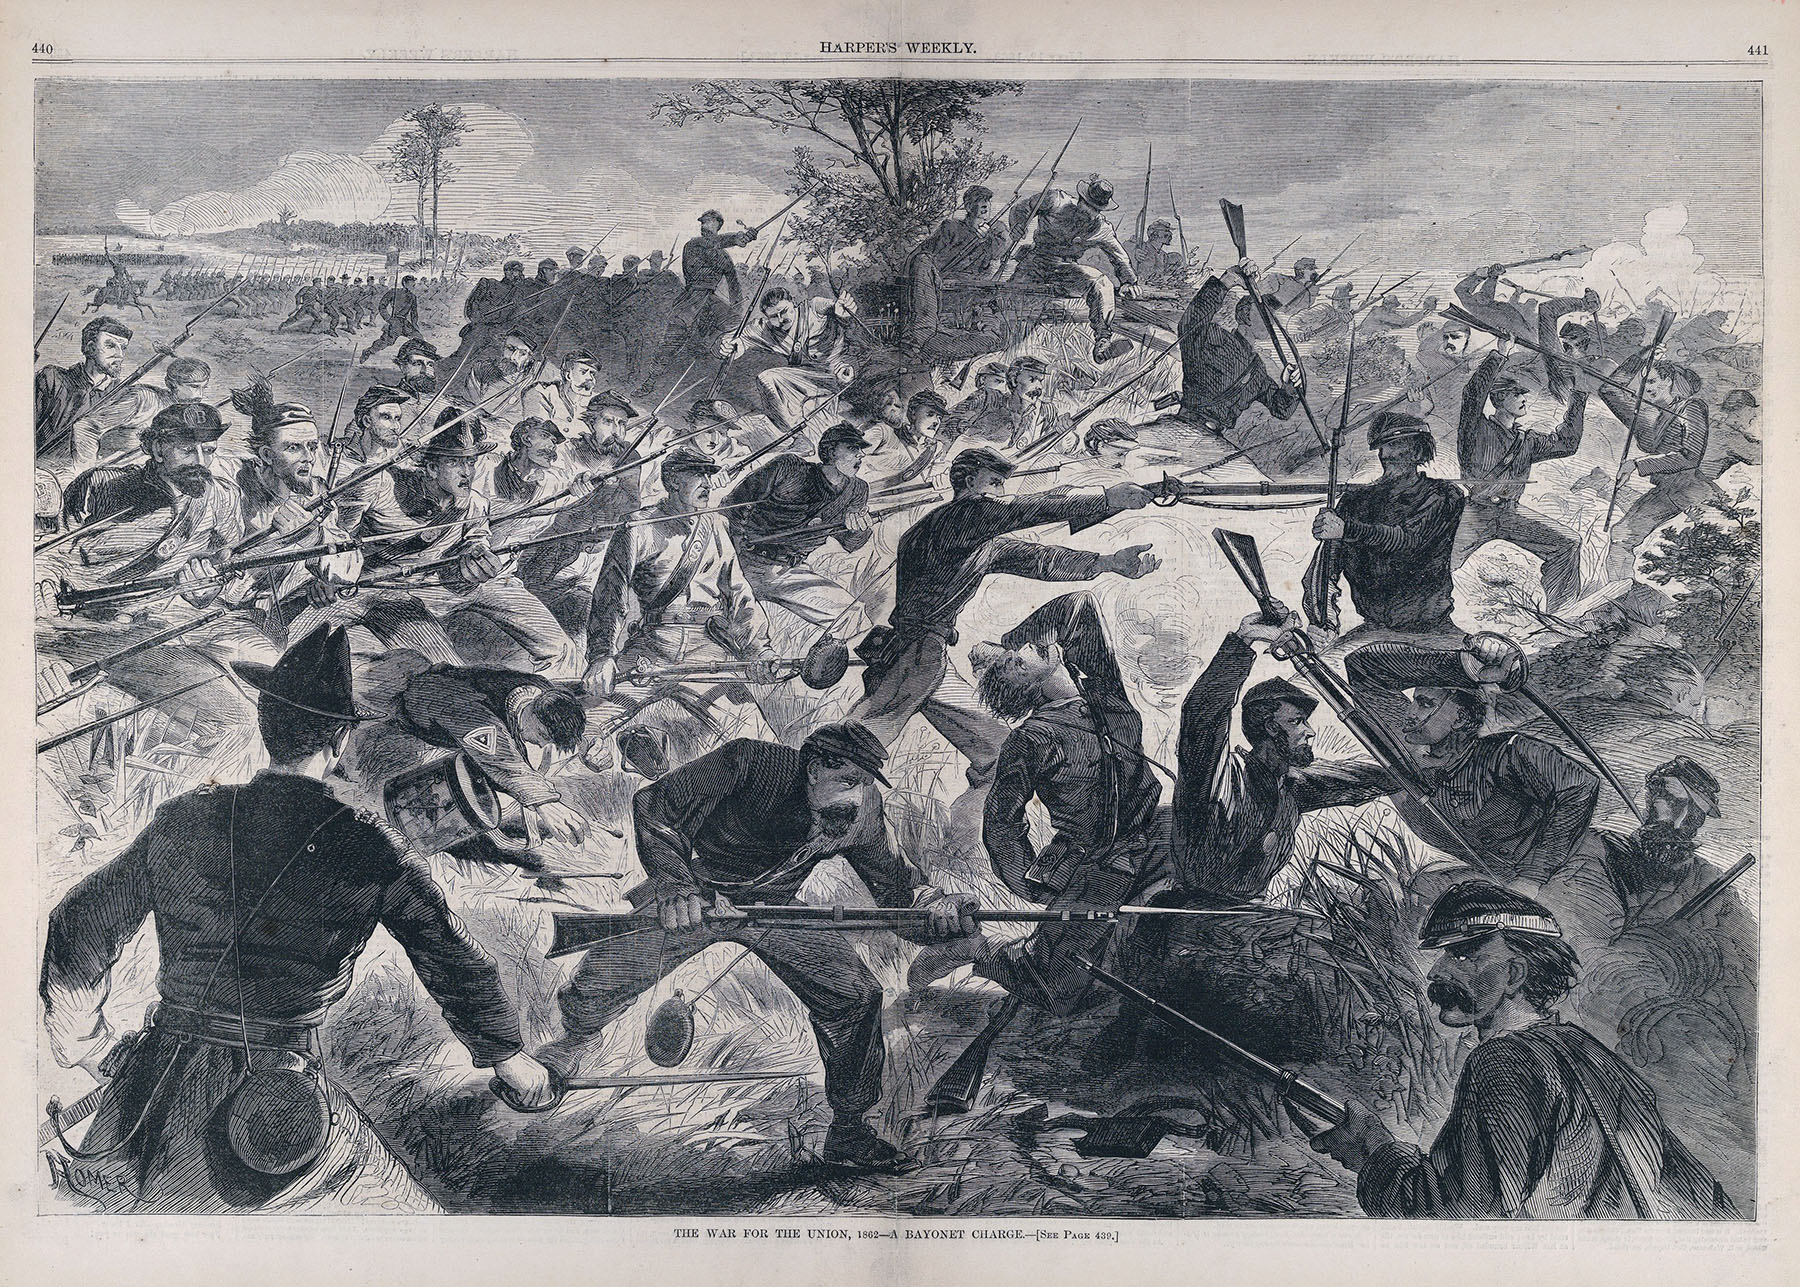 After Winslow Homer, The War for the Union, 1862—A Bayonet Charge, wood engraving on paper, Harper's Weekly, July 12, 1862, 40.8 x 57.5 cm (The Metropolitan Museum of Art)